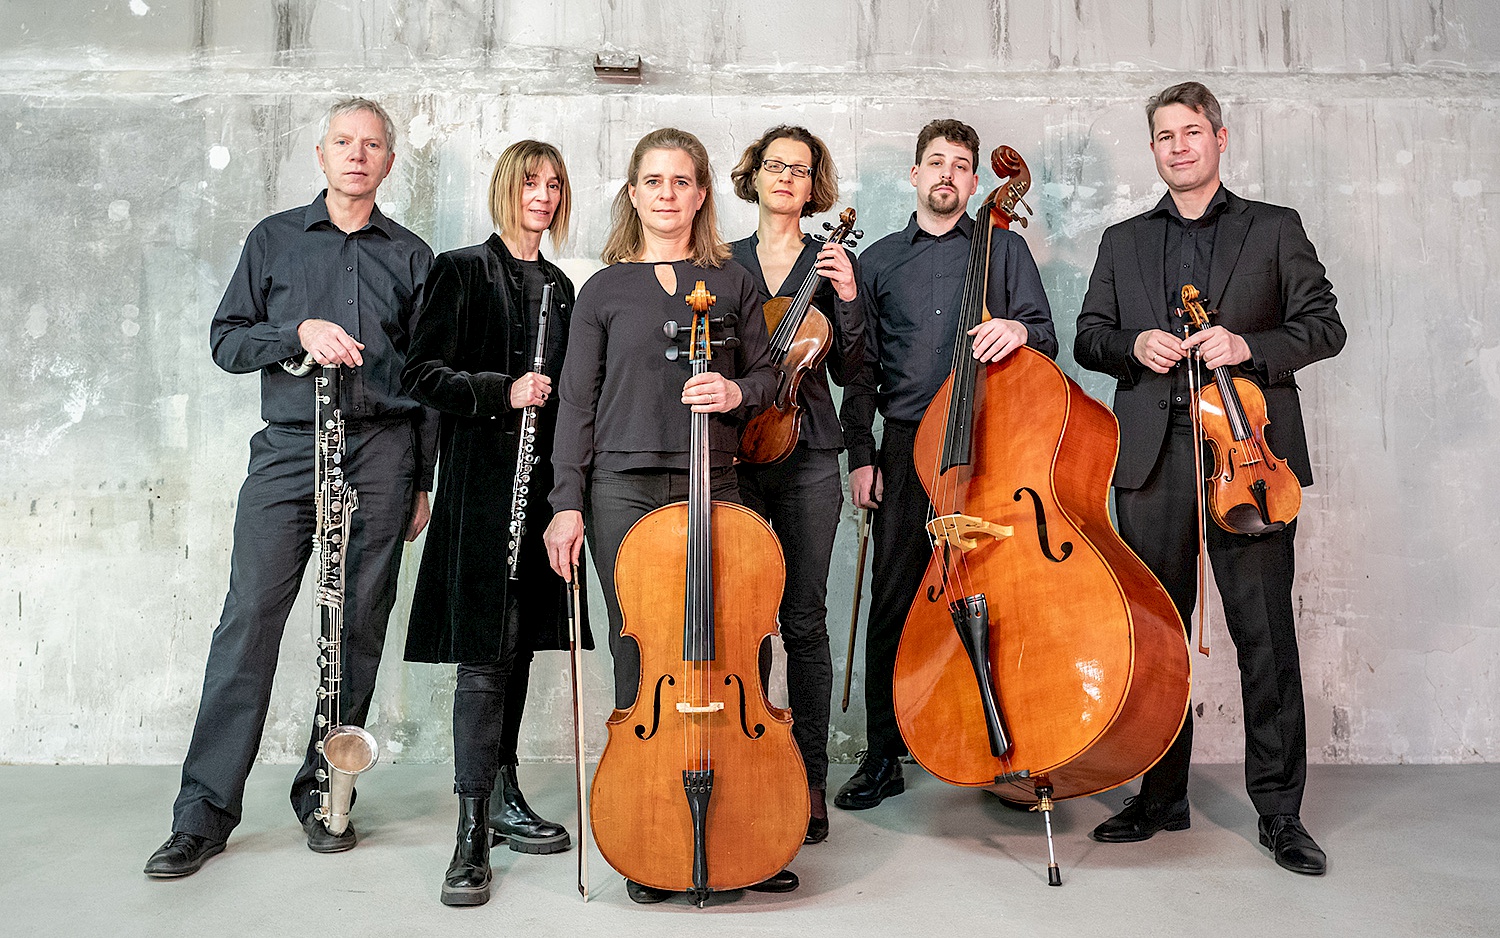 The six musicians of Ensemble KNM Berlin with their instruments in hand.